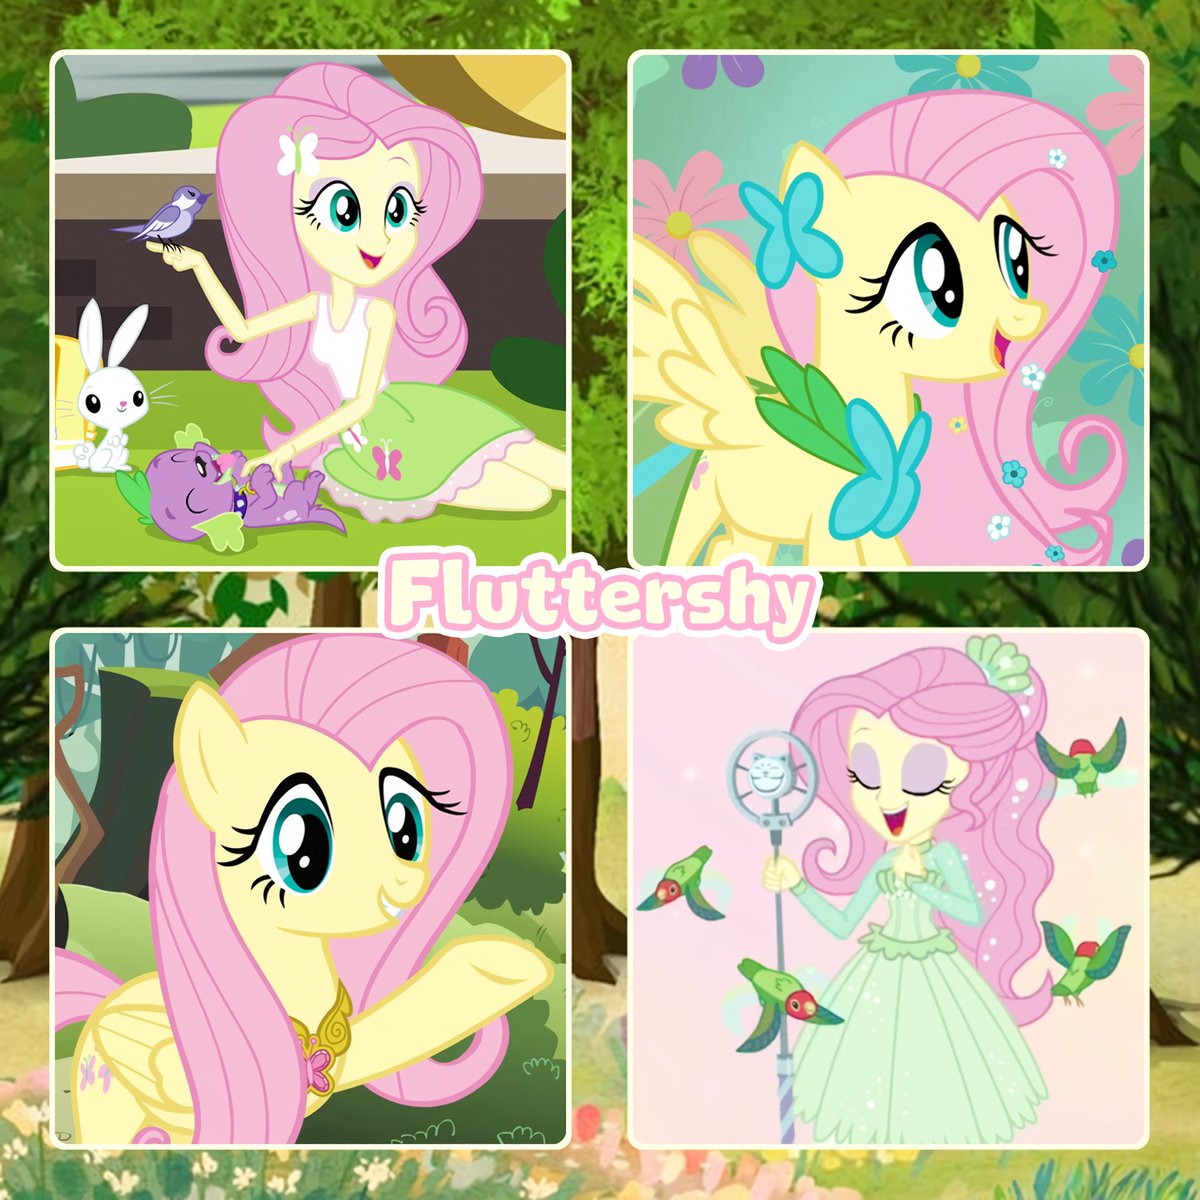 💛🌳🌸 Fluttershy is a cottagecore girl 🌸🌳💛